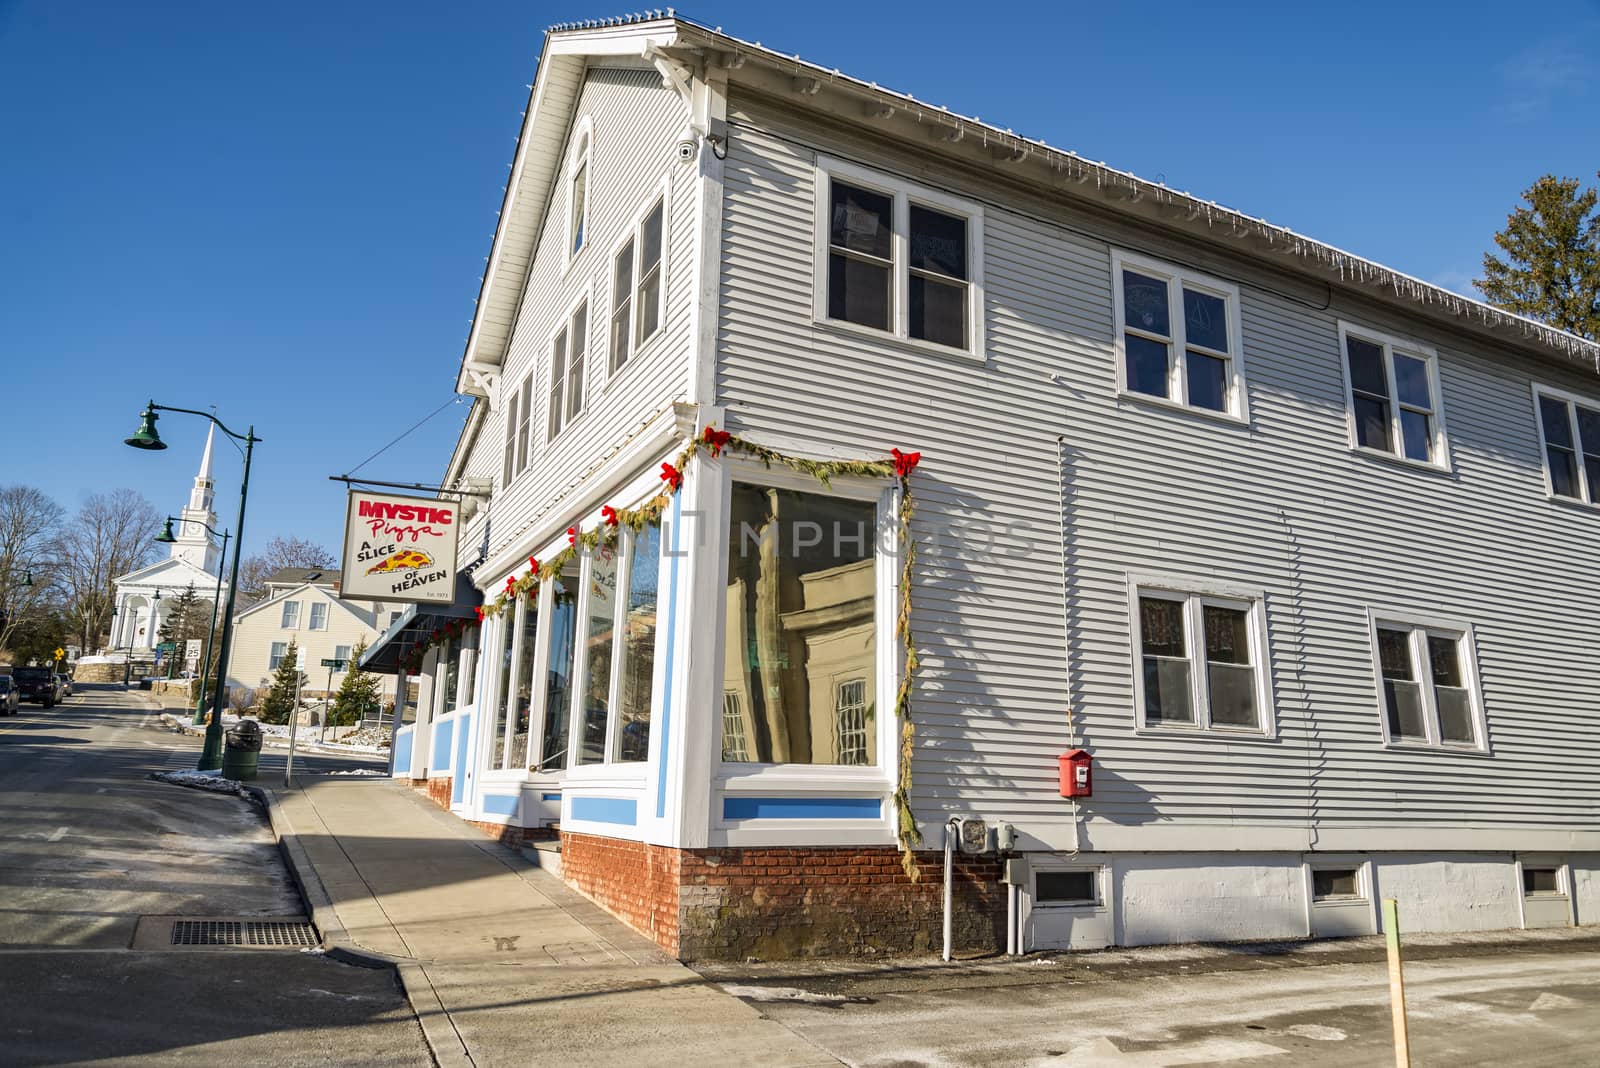 MYSTIC, CT - DECEMBER 17: Mystic Pizza in Connecticut, famous for the 1988 movie with Julia Roberts , located on the Mystic town, on December 17, 2017 in Mystic, CT USA